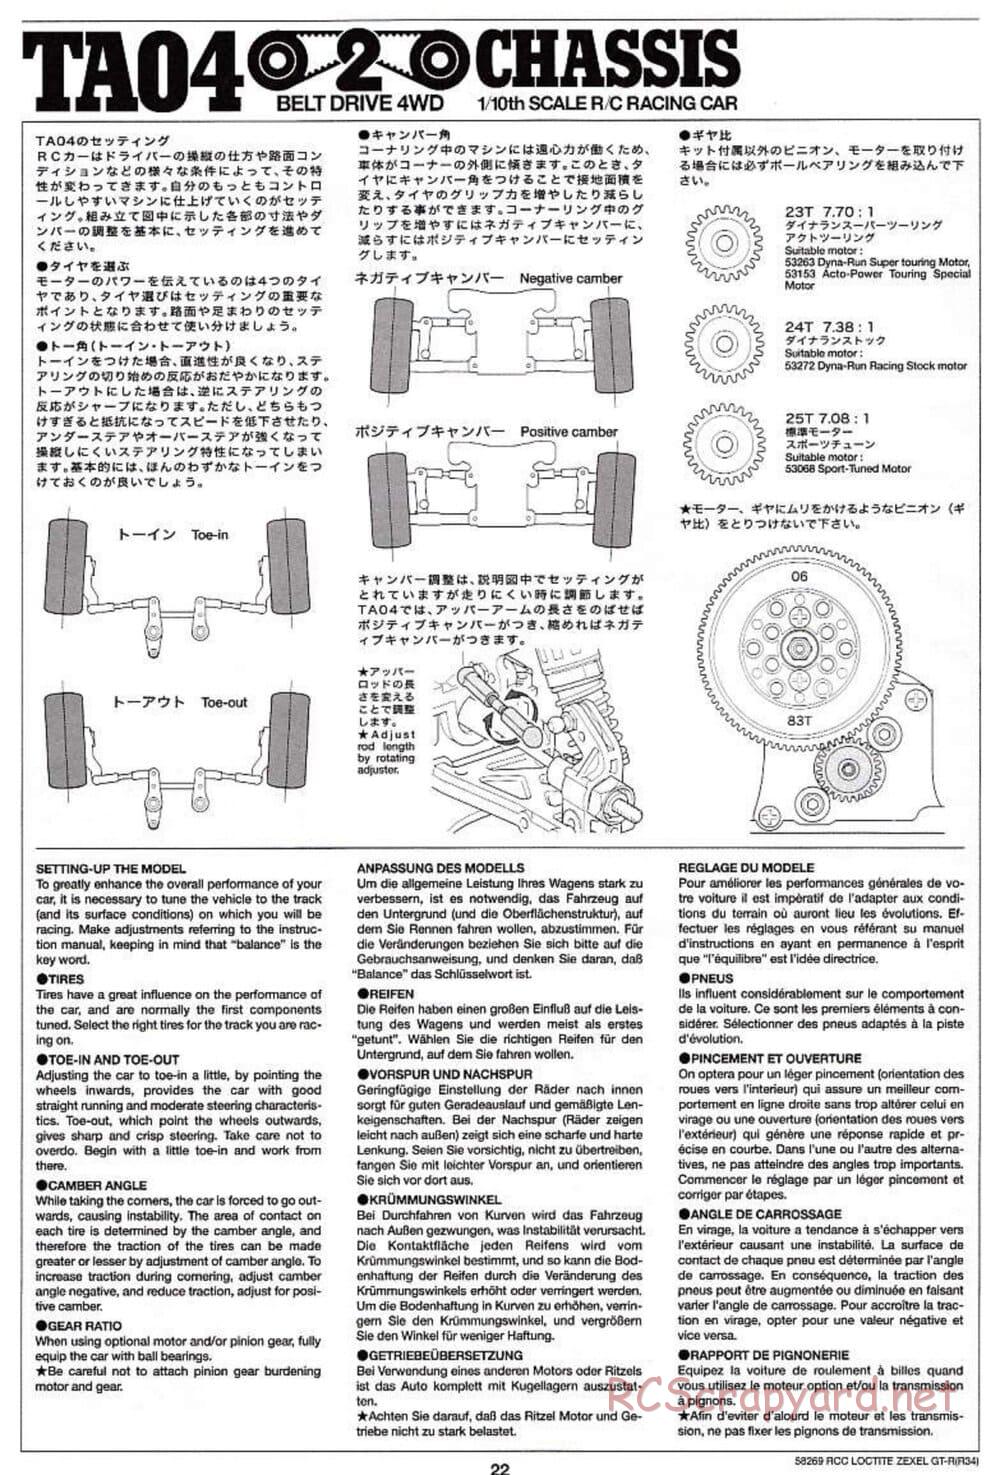 Tamiya - Loctite Zexel Skyline GT-R (R34) - TA-04 Chassis - Manual - Page 22